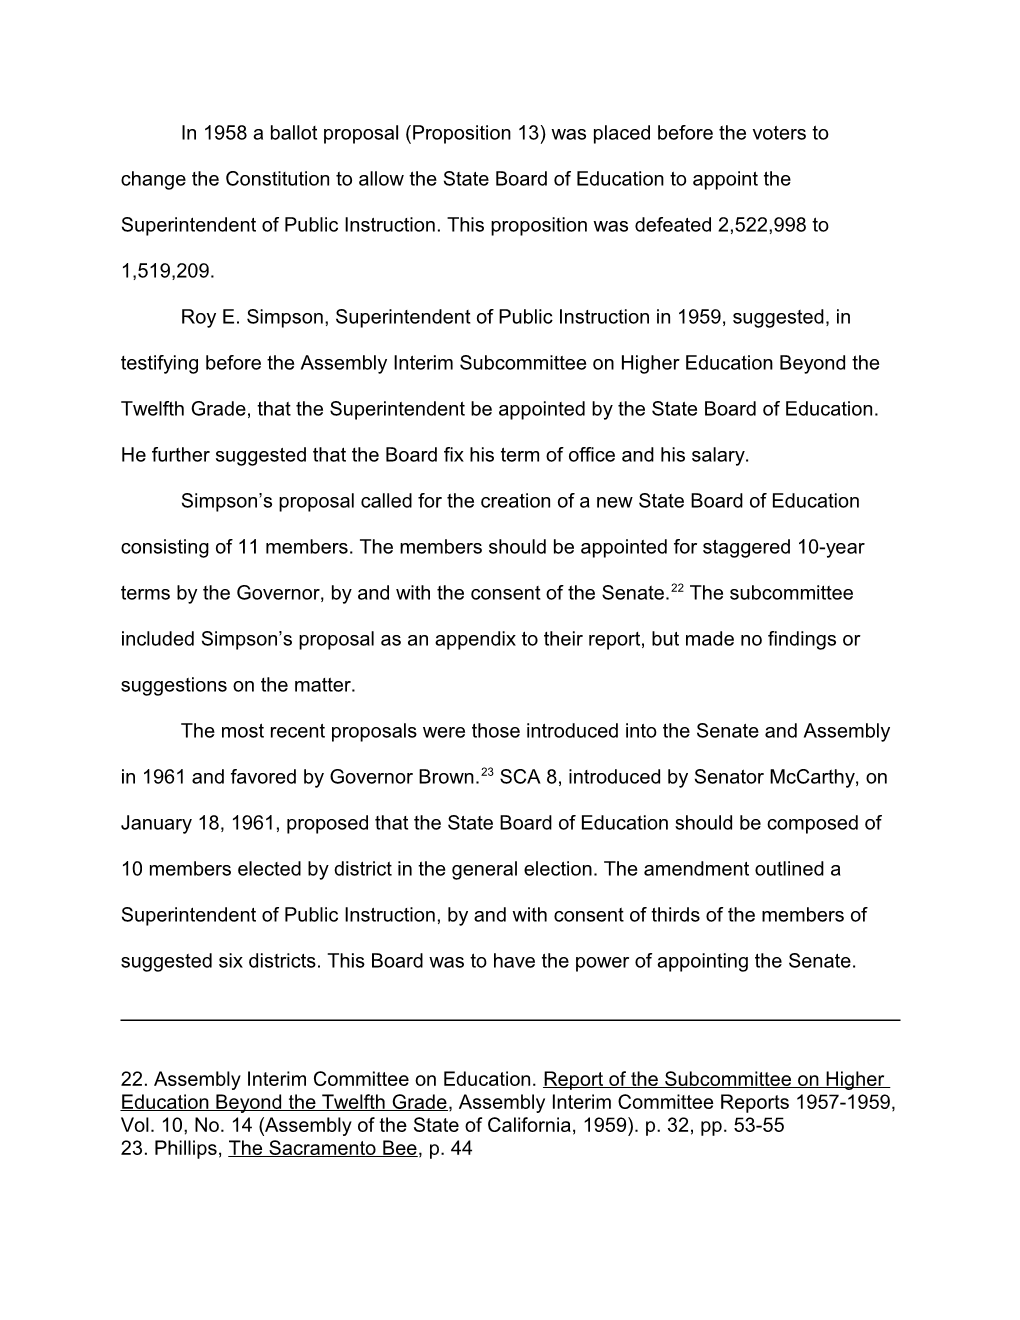 State Superintendent, Part 2 - Historical Documents (CA Dept of Education)